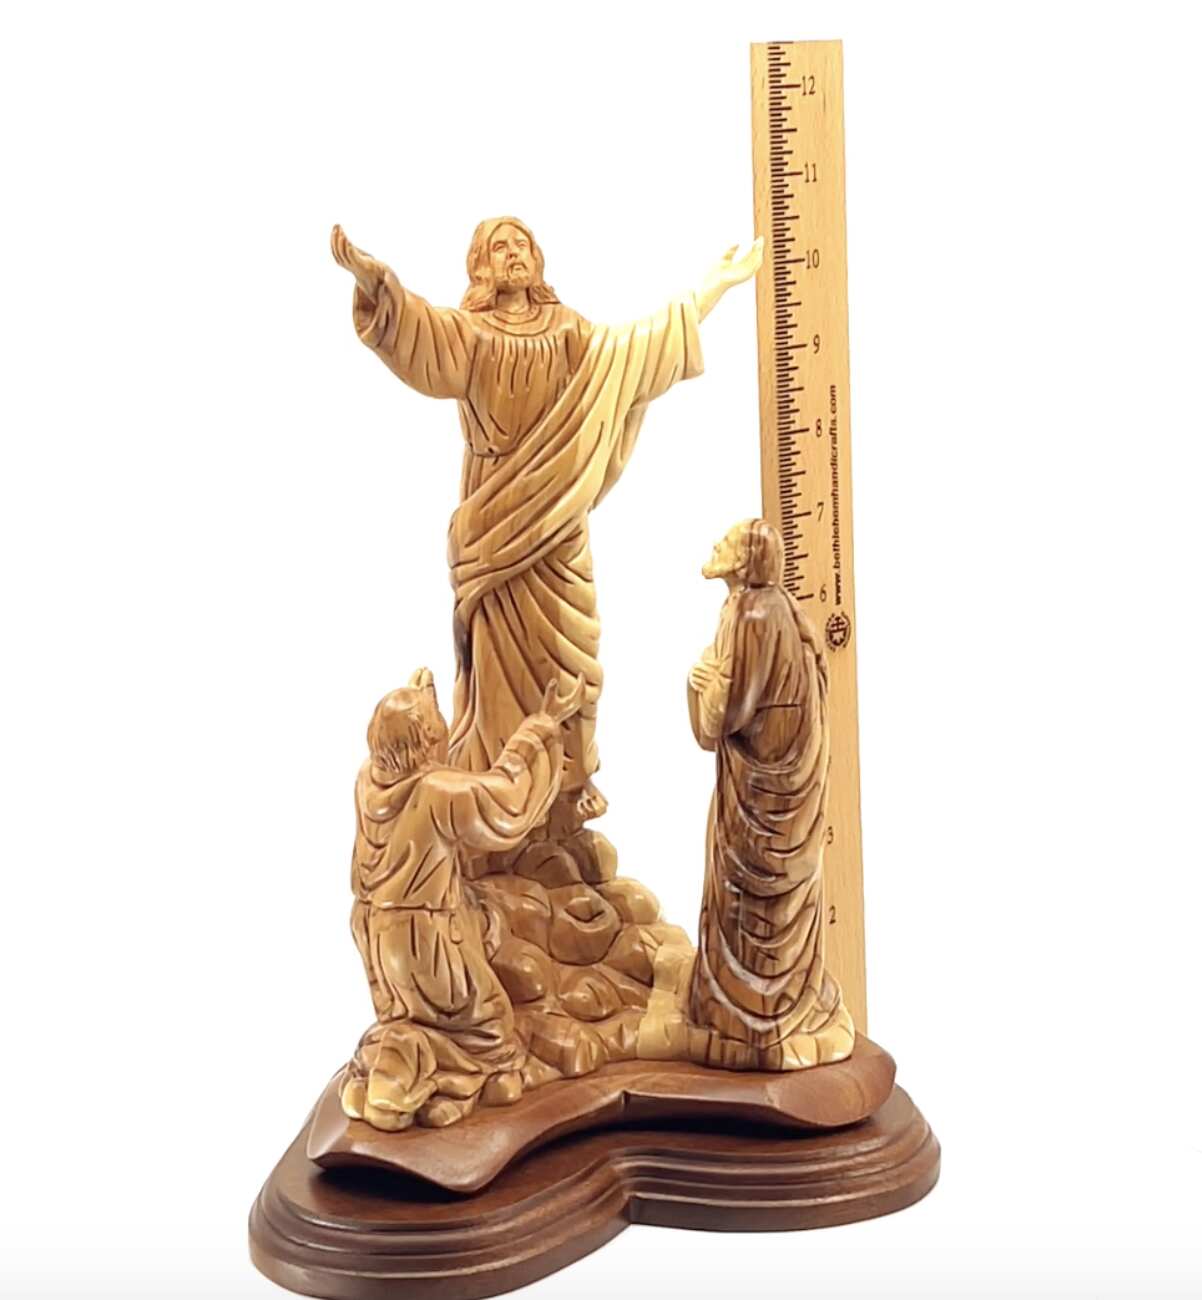 Jesus Christ "Ascension into Heaven" Carving, 11" Holy Land Olive Wood Statue